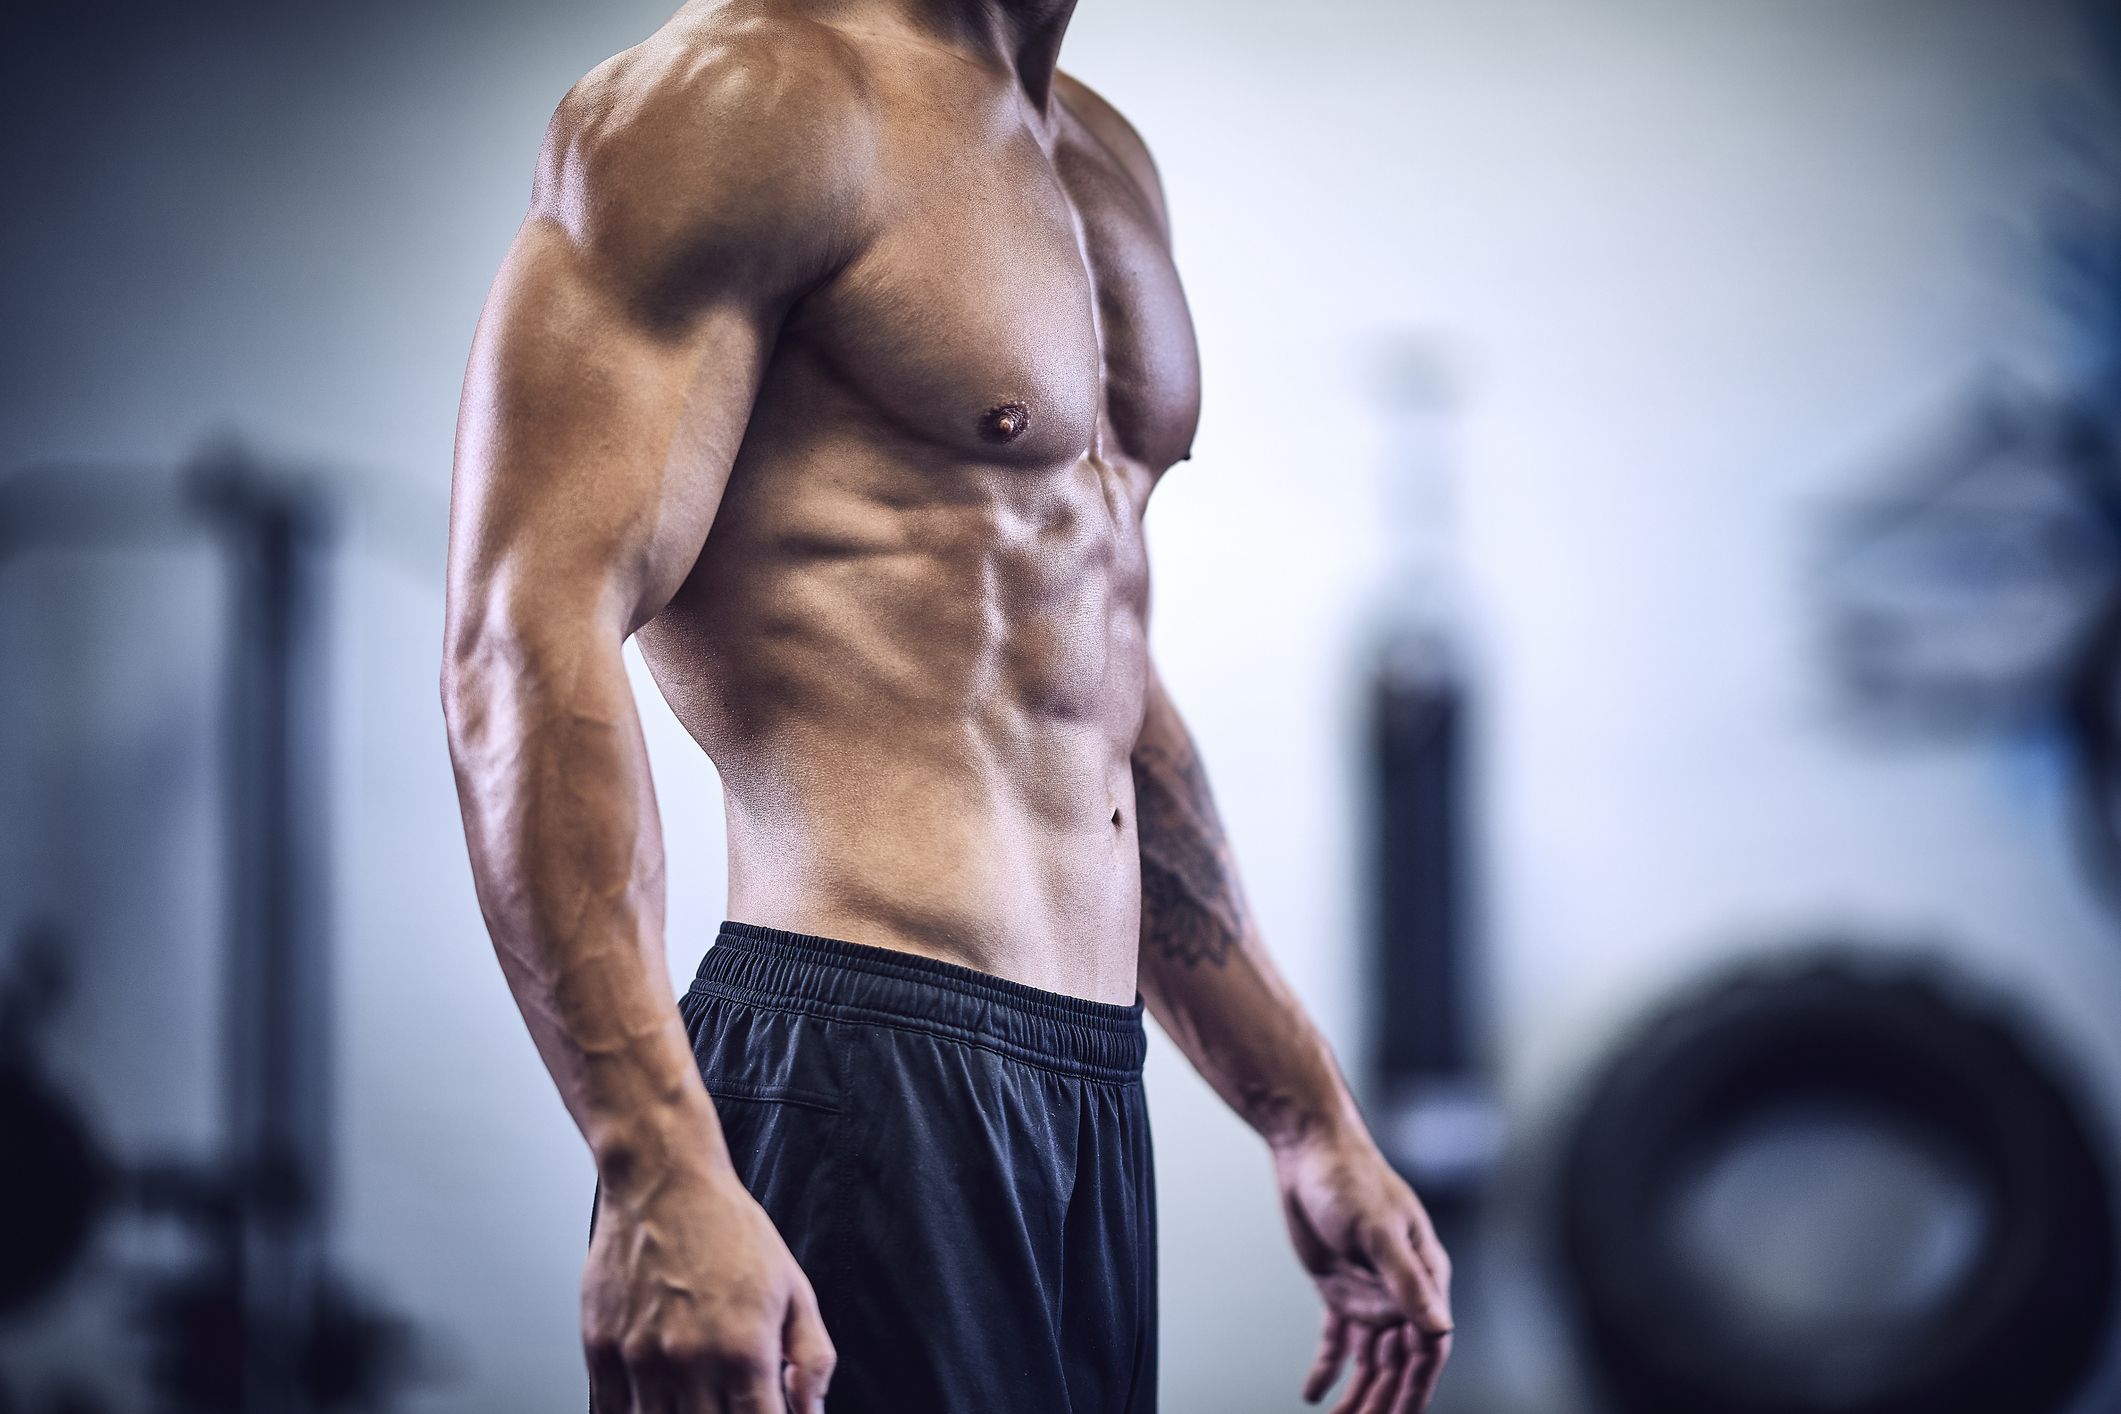 A Trainer Shared the 3 Best Chest Exercises for 'Chiseled Pecs